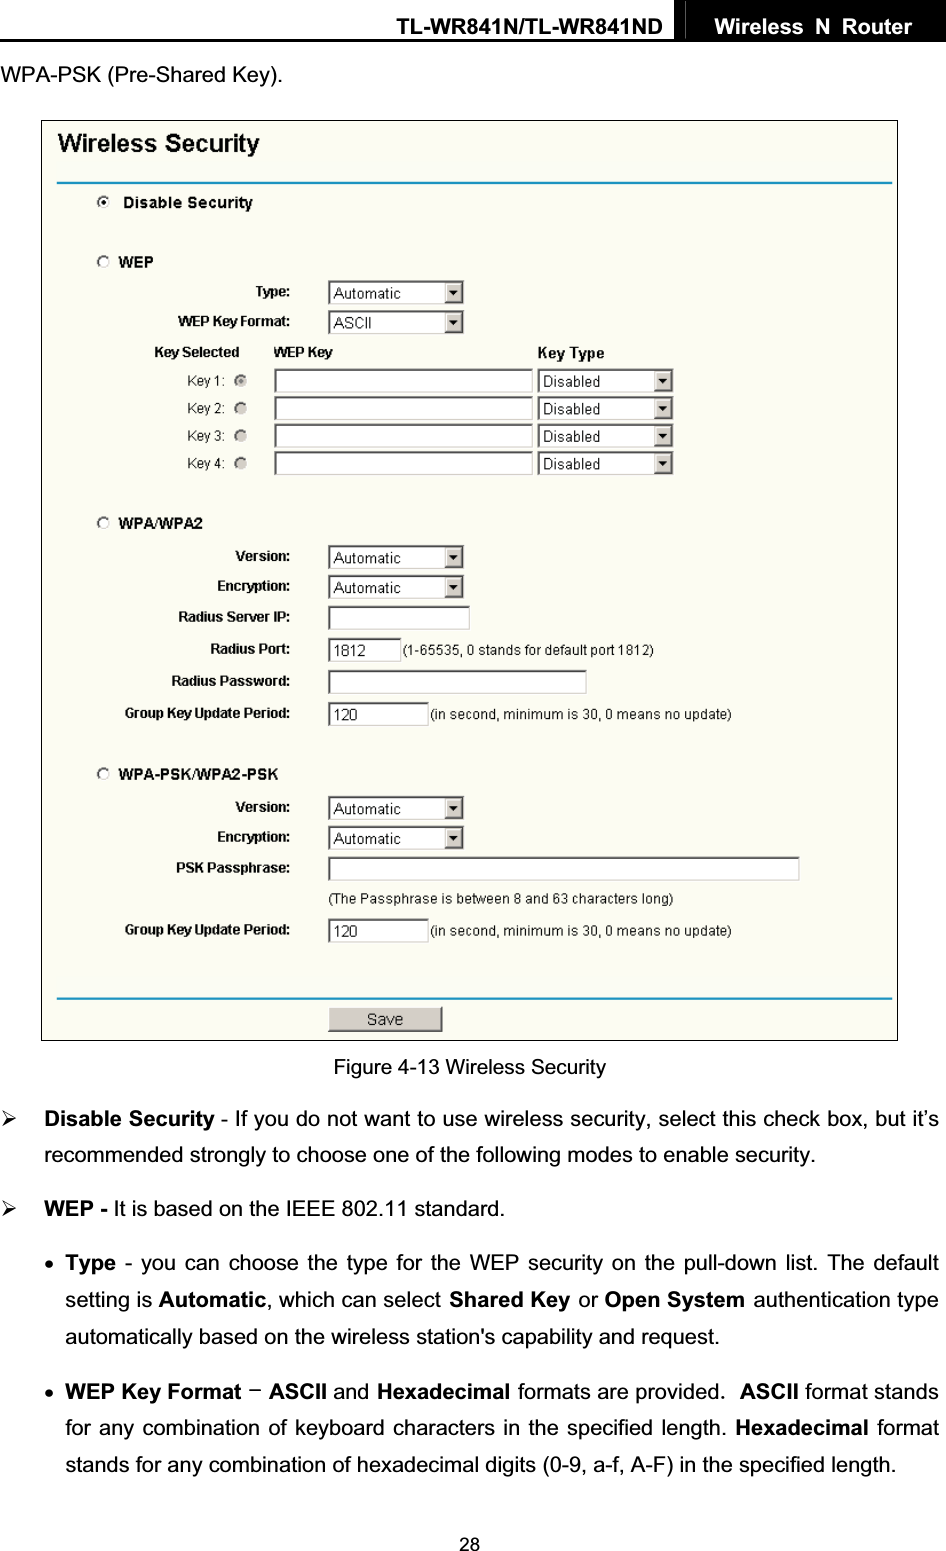 TL-WR841N/TL-WR841ND  Wireless N Router  28WPA-PSK (Pre-Shared Key). Figure 4-13 Wireless Security ¾Disable Security - If you do not want to use wireless security, select this check box, but it’s recommended strongly to choose one of the following modes to enable security. ¾WEP - It is based on the IEEE 802.11 standard. xType - you can choose the type for the WEP security on the pull-down list. The default setting is Automatic, which can selectShared Keyor Open Systemauthentication type automatically based on the wireless station&apos;s capability and request. xWEP Key FormatASCII andHexadecimalformats are providedASCII format stands for any combination of keyboard characters in the specified length. Hexadecimal format stands for any combination of hexadecimal digits (0-9, a-f, A-F) in the specified length. 